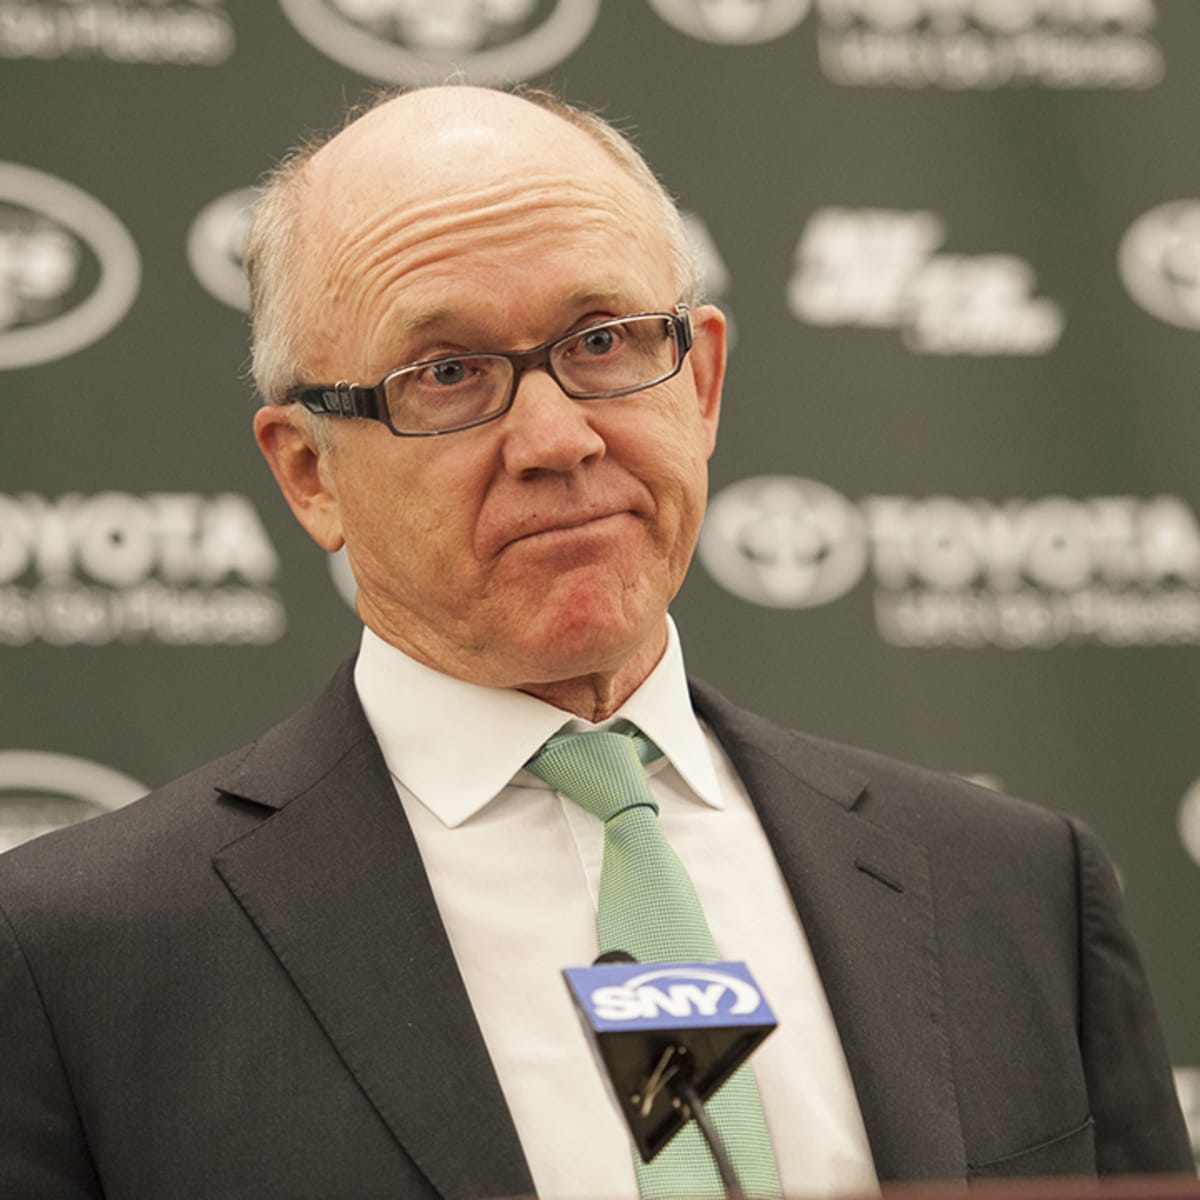 Jets owner Woody Johnson Made &#39;inappropriate&#39; comments as ambassador -  Sports Illustrated